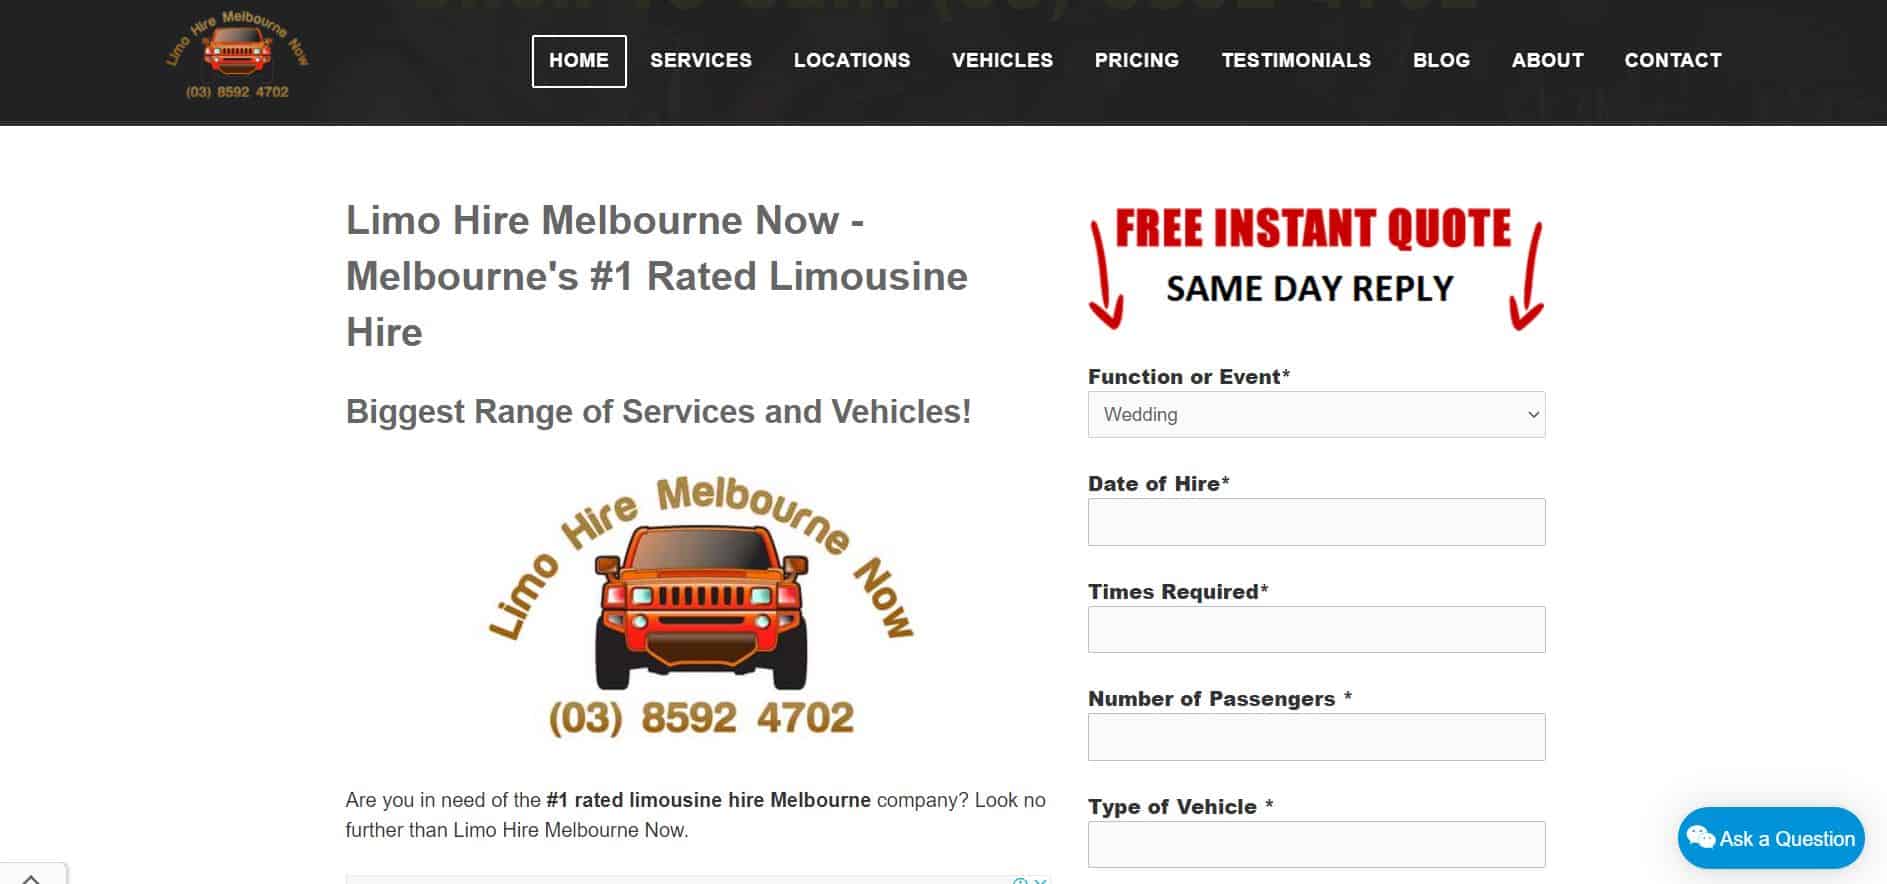 limo hire melbourne now